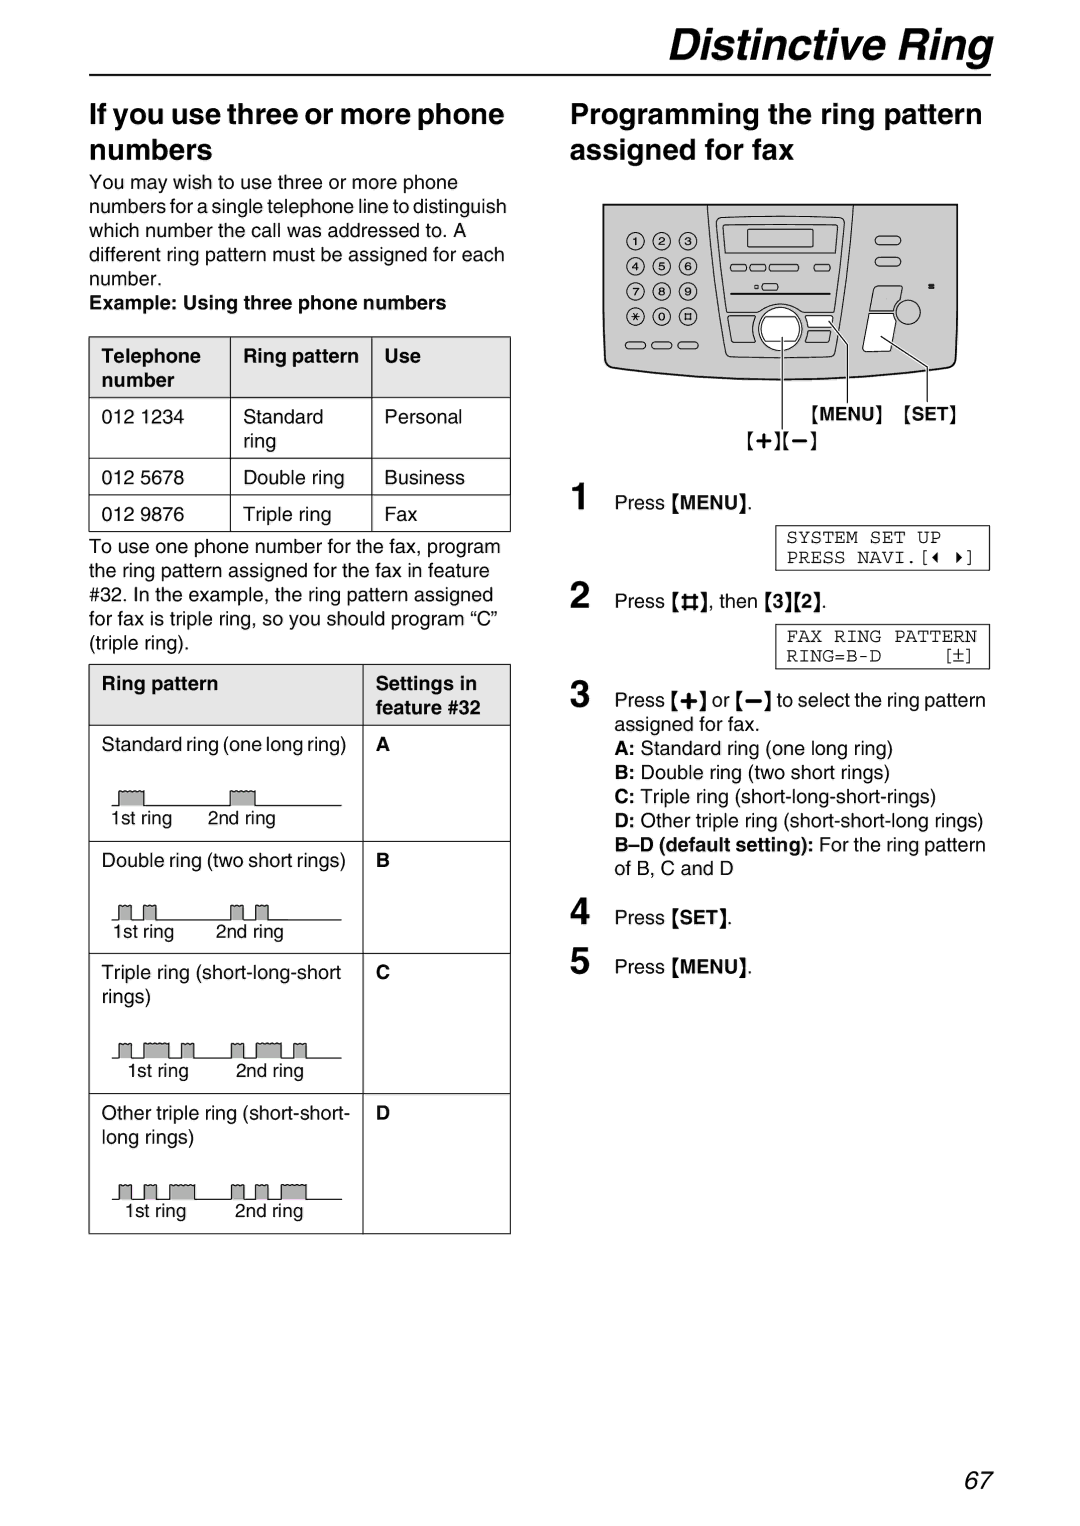 Panasonic KX-FPG371 manual If you use three or more phone numbers, Programming the ring pattern assigned for fax 